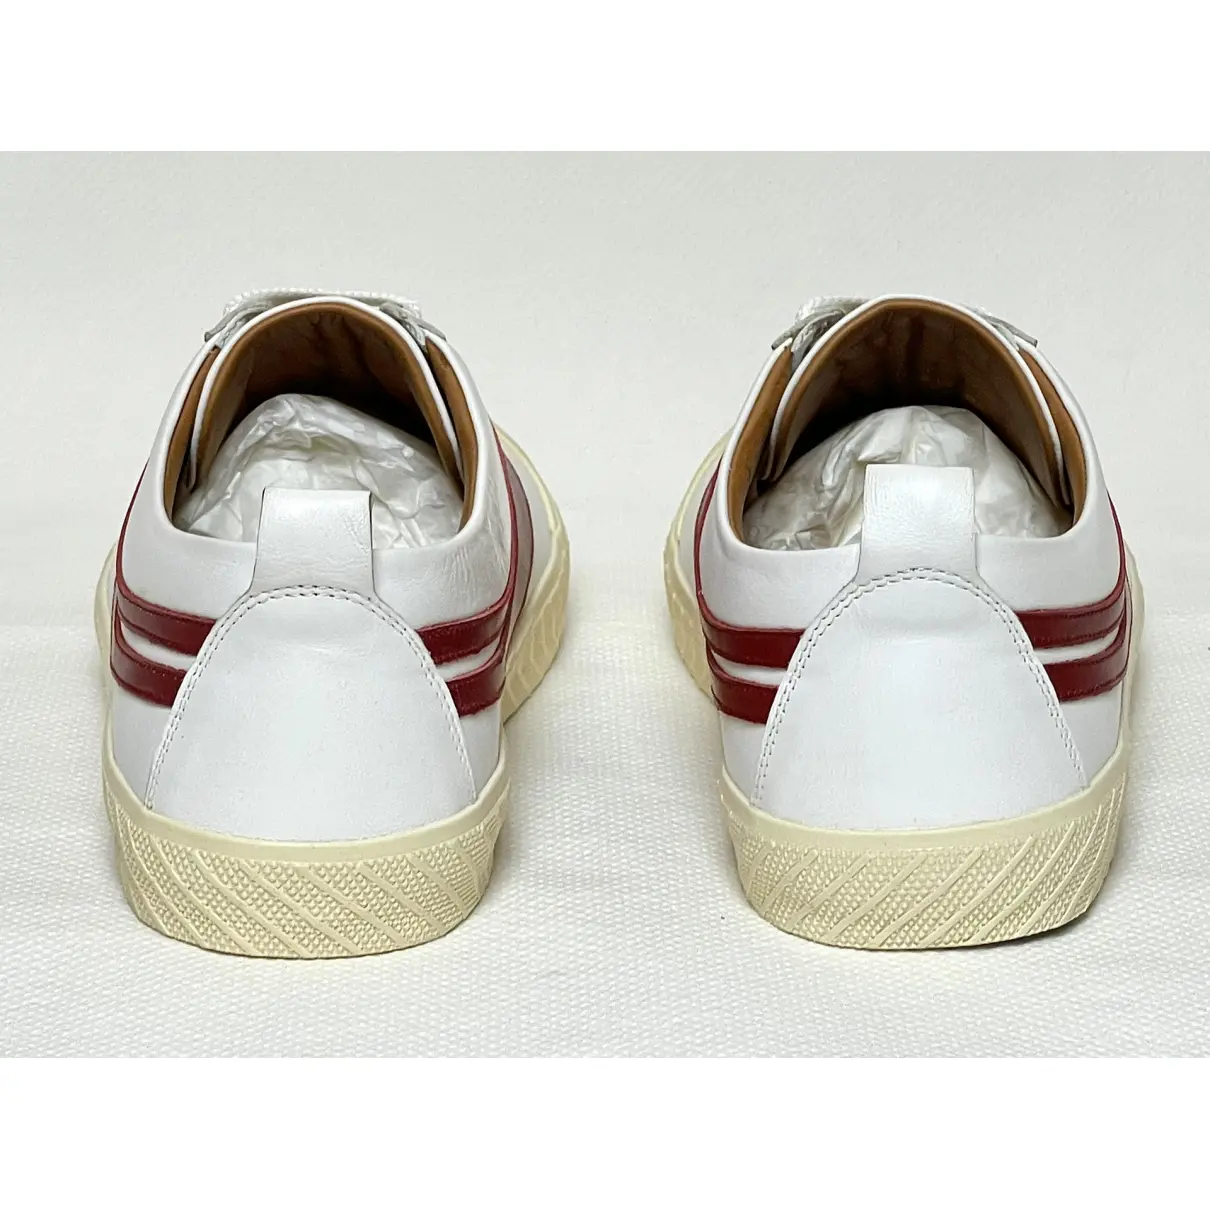 Leather trainers Bally